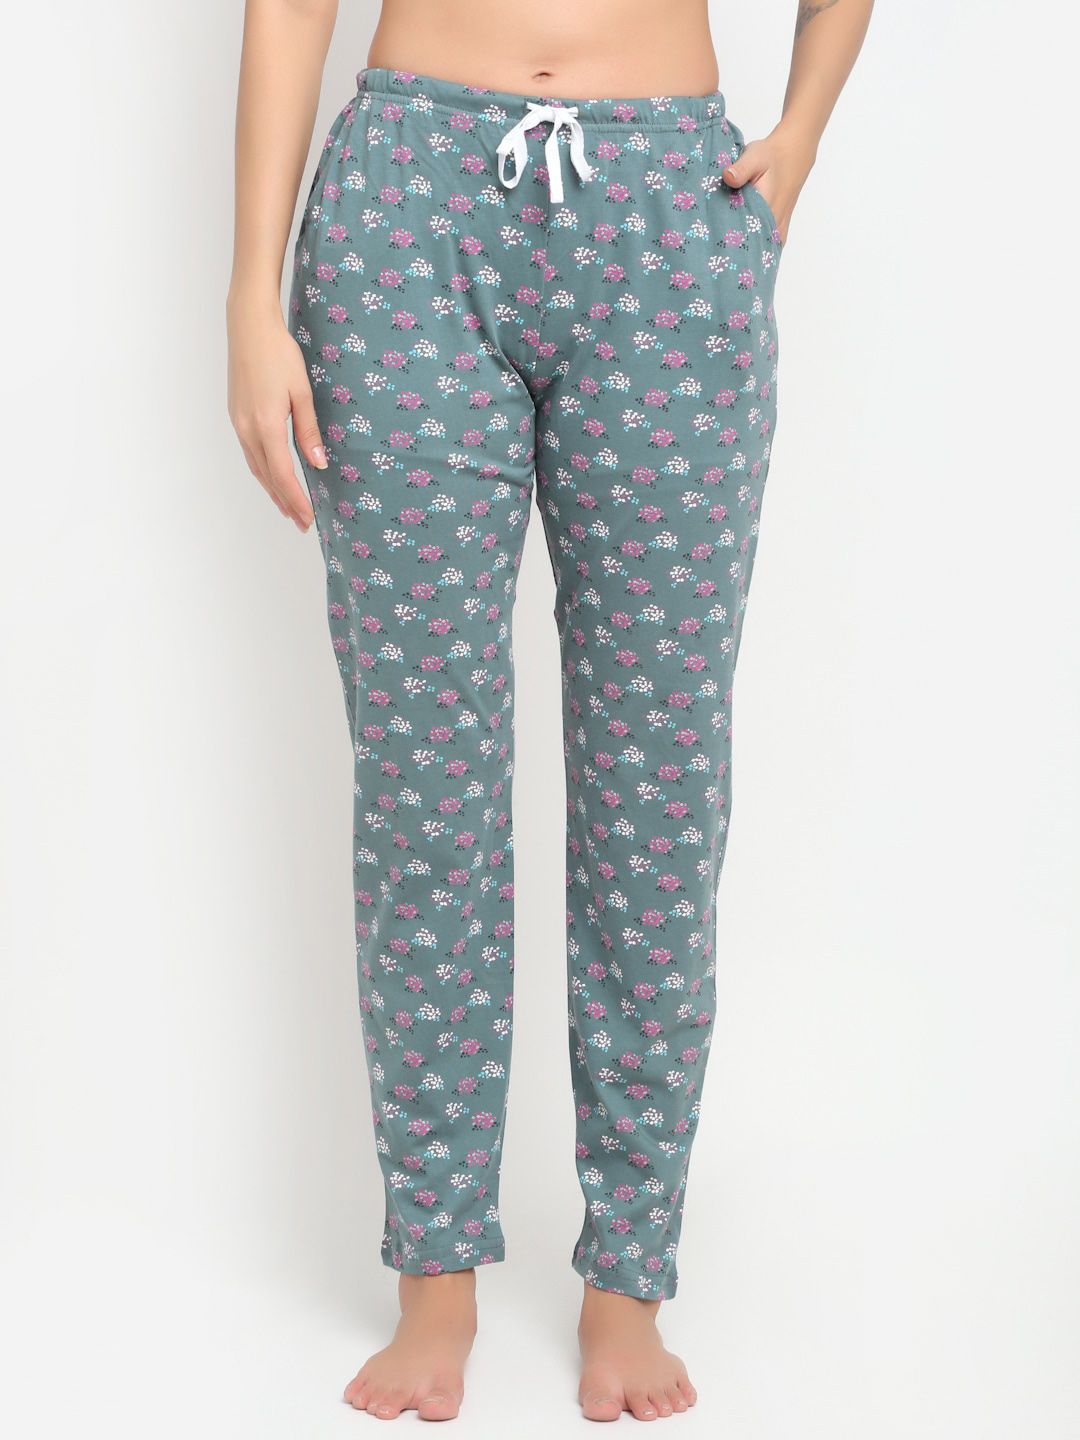 Kanvin Women Grey & Pink Floral Printed Cotton Lounge Pants Price in India